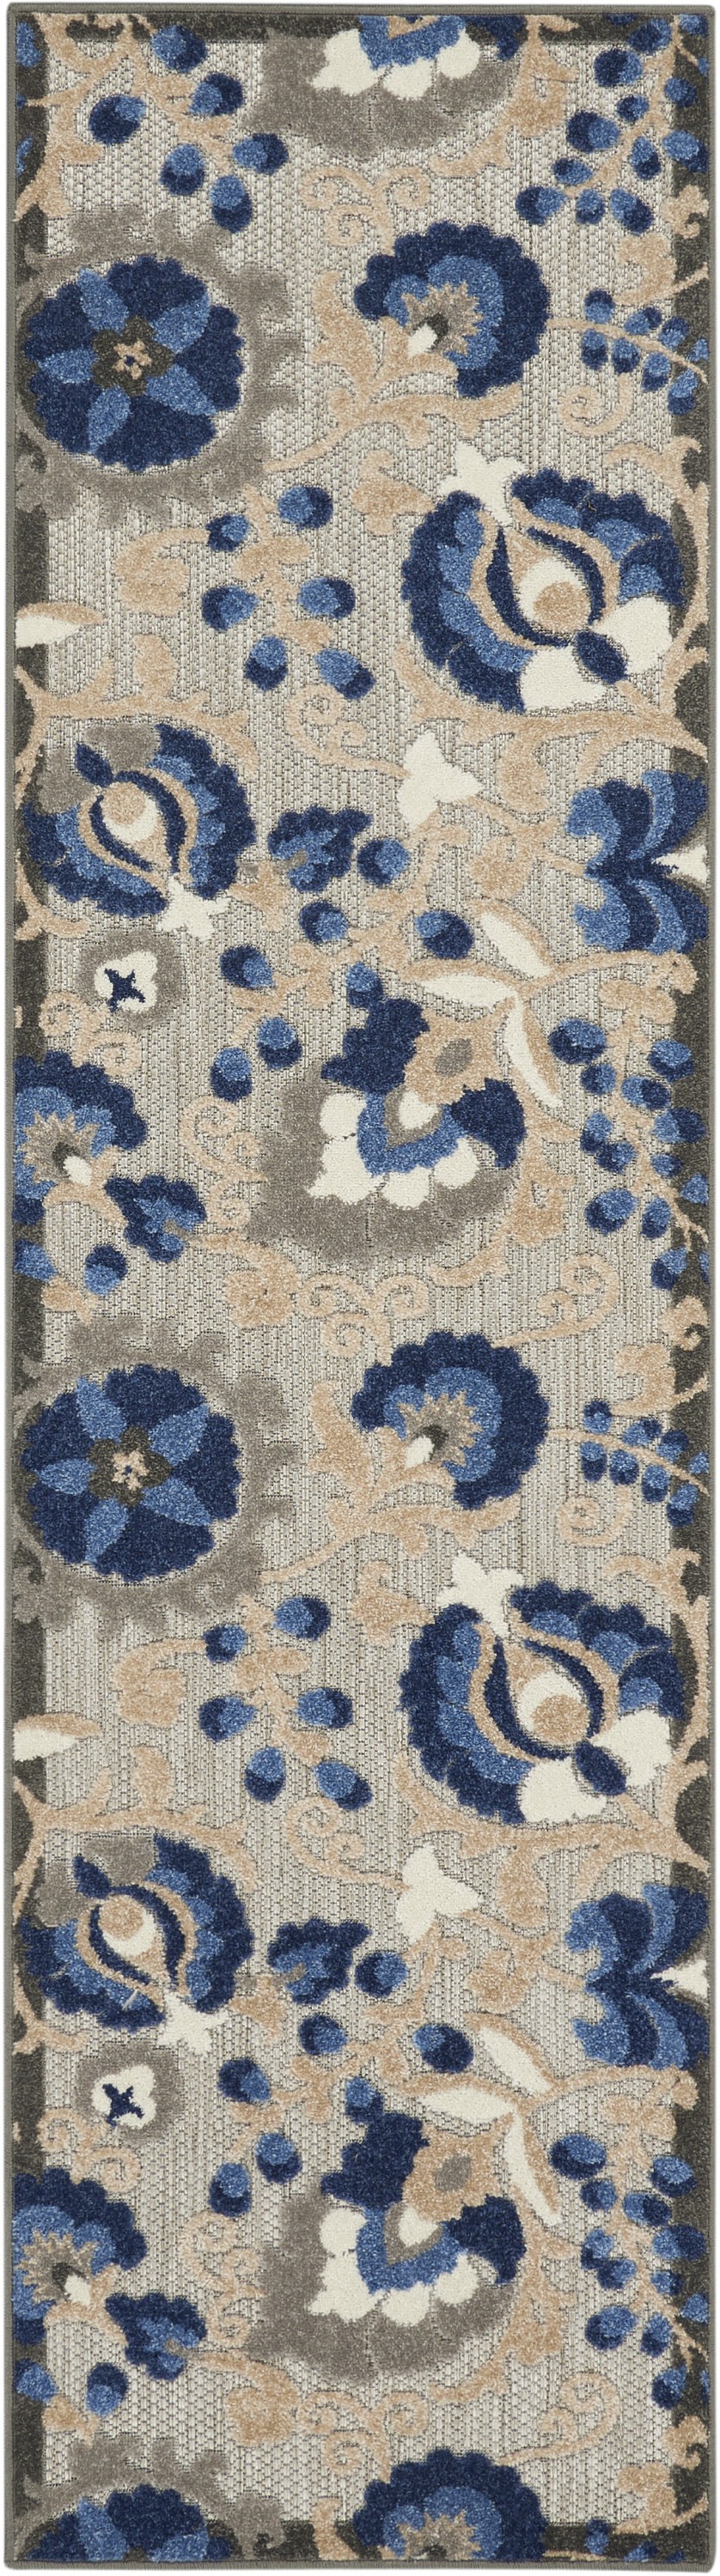 2' X 8' Blue And Gray Floral Indoor Outdoor Area Rug-384853-1